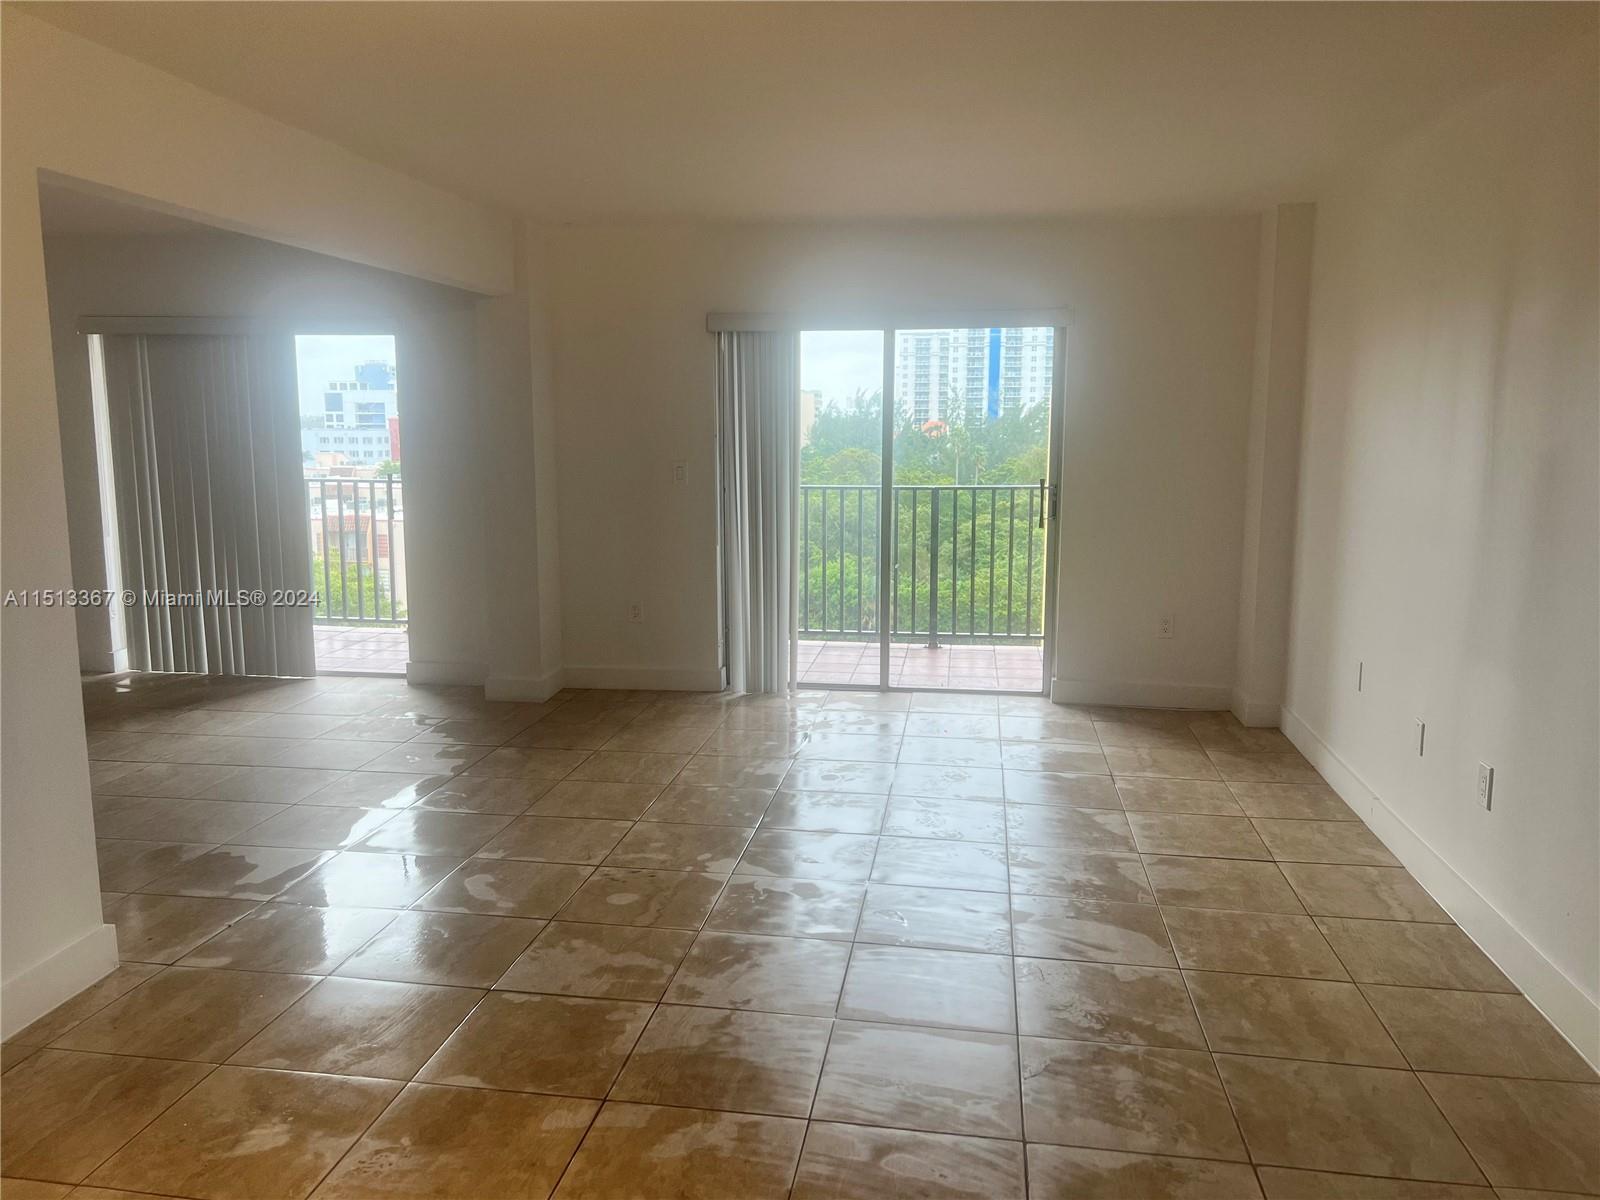 Photo of 4717 NW 7th St #801-10 in Miami, FL